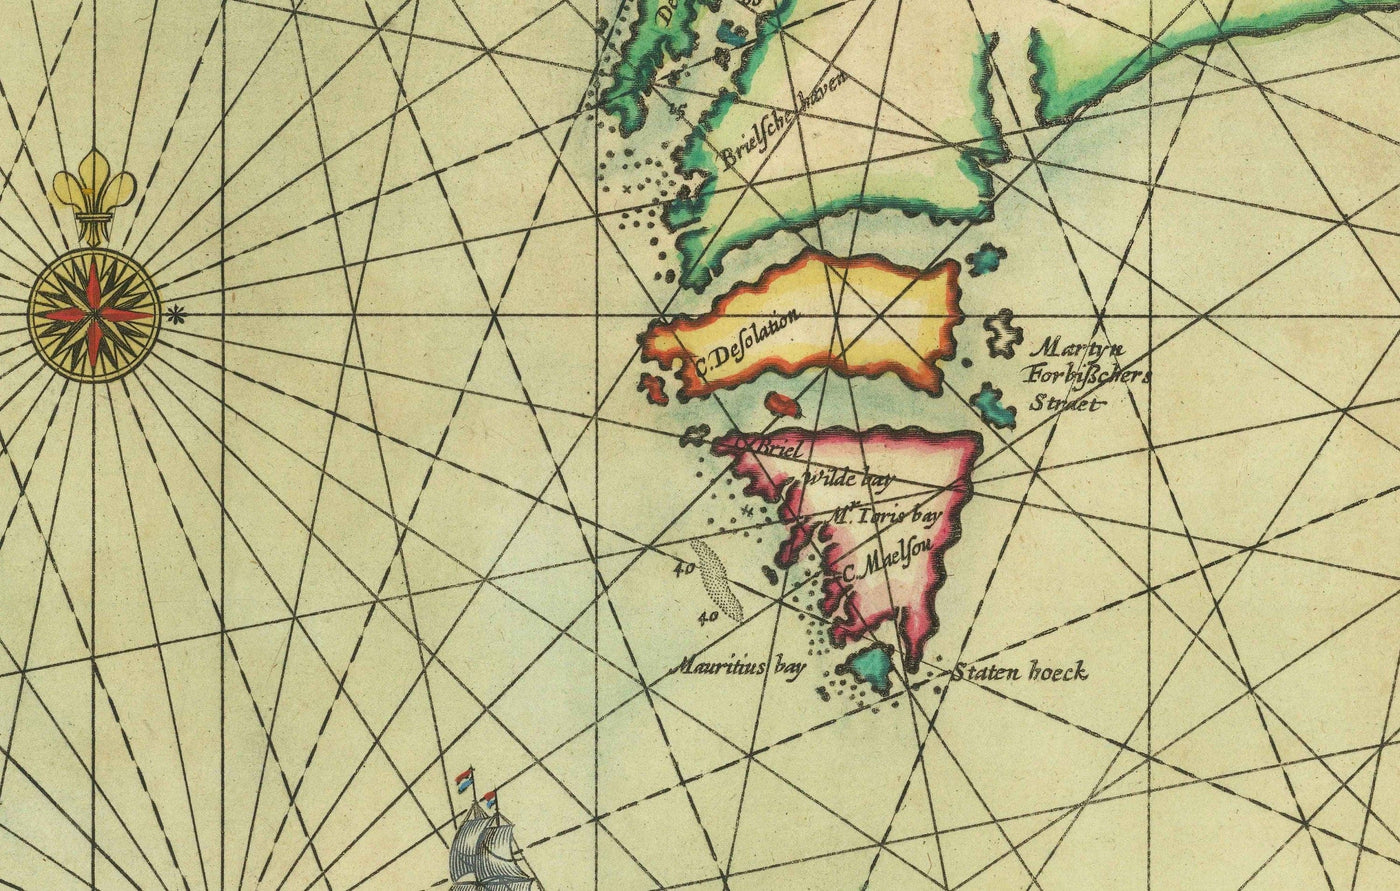 Old Map of Greenland, Iceland & North Sea, 1661 by van Loon - Viking Exploration Chart